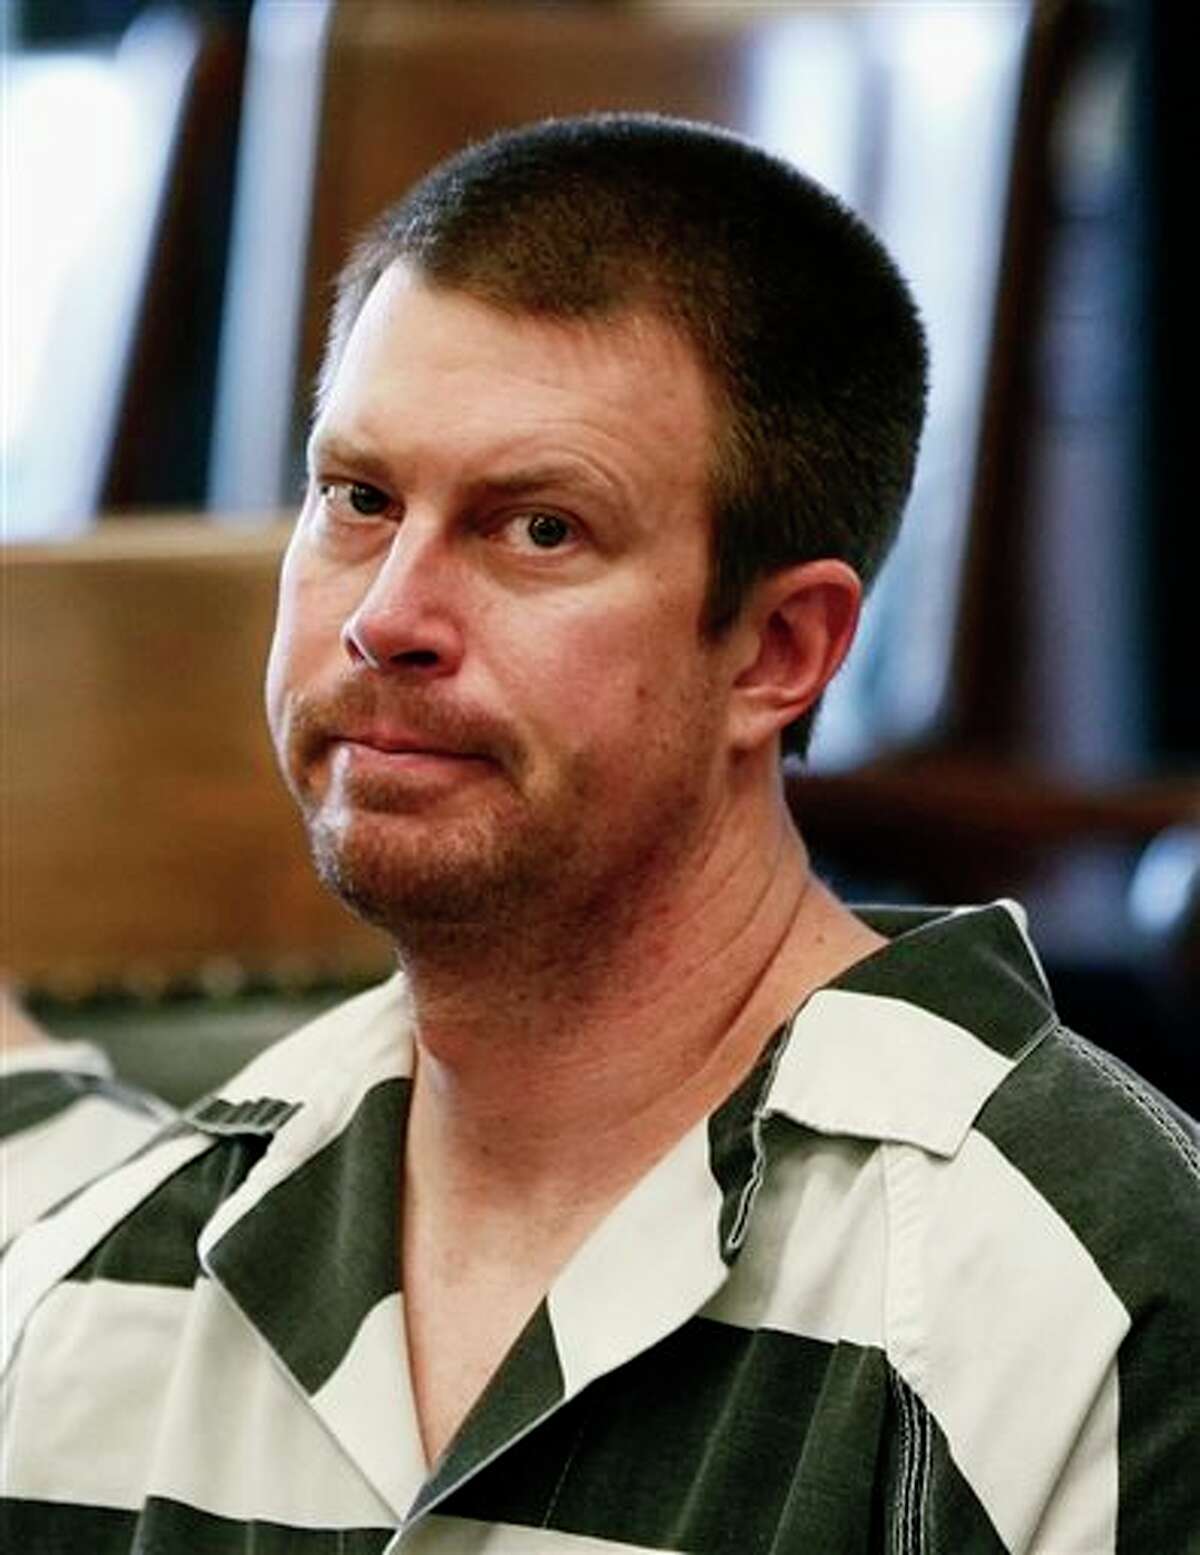 FILE - In this May 8, 2012, file photo, former NFL quarterback Ryan Leaf, center, sits in a Cascade County courtroom in Great Falls, Mont. Leaf has been sentenced to five years in prison in Texas for violating terms of his probation, Tuesday, Sept. 9, 2014. (AP Photo/The Great Falls Tribune, Larry Beckner, File) NO SALES